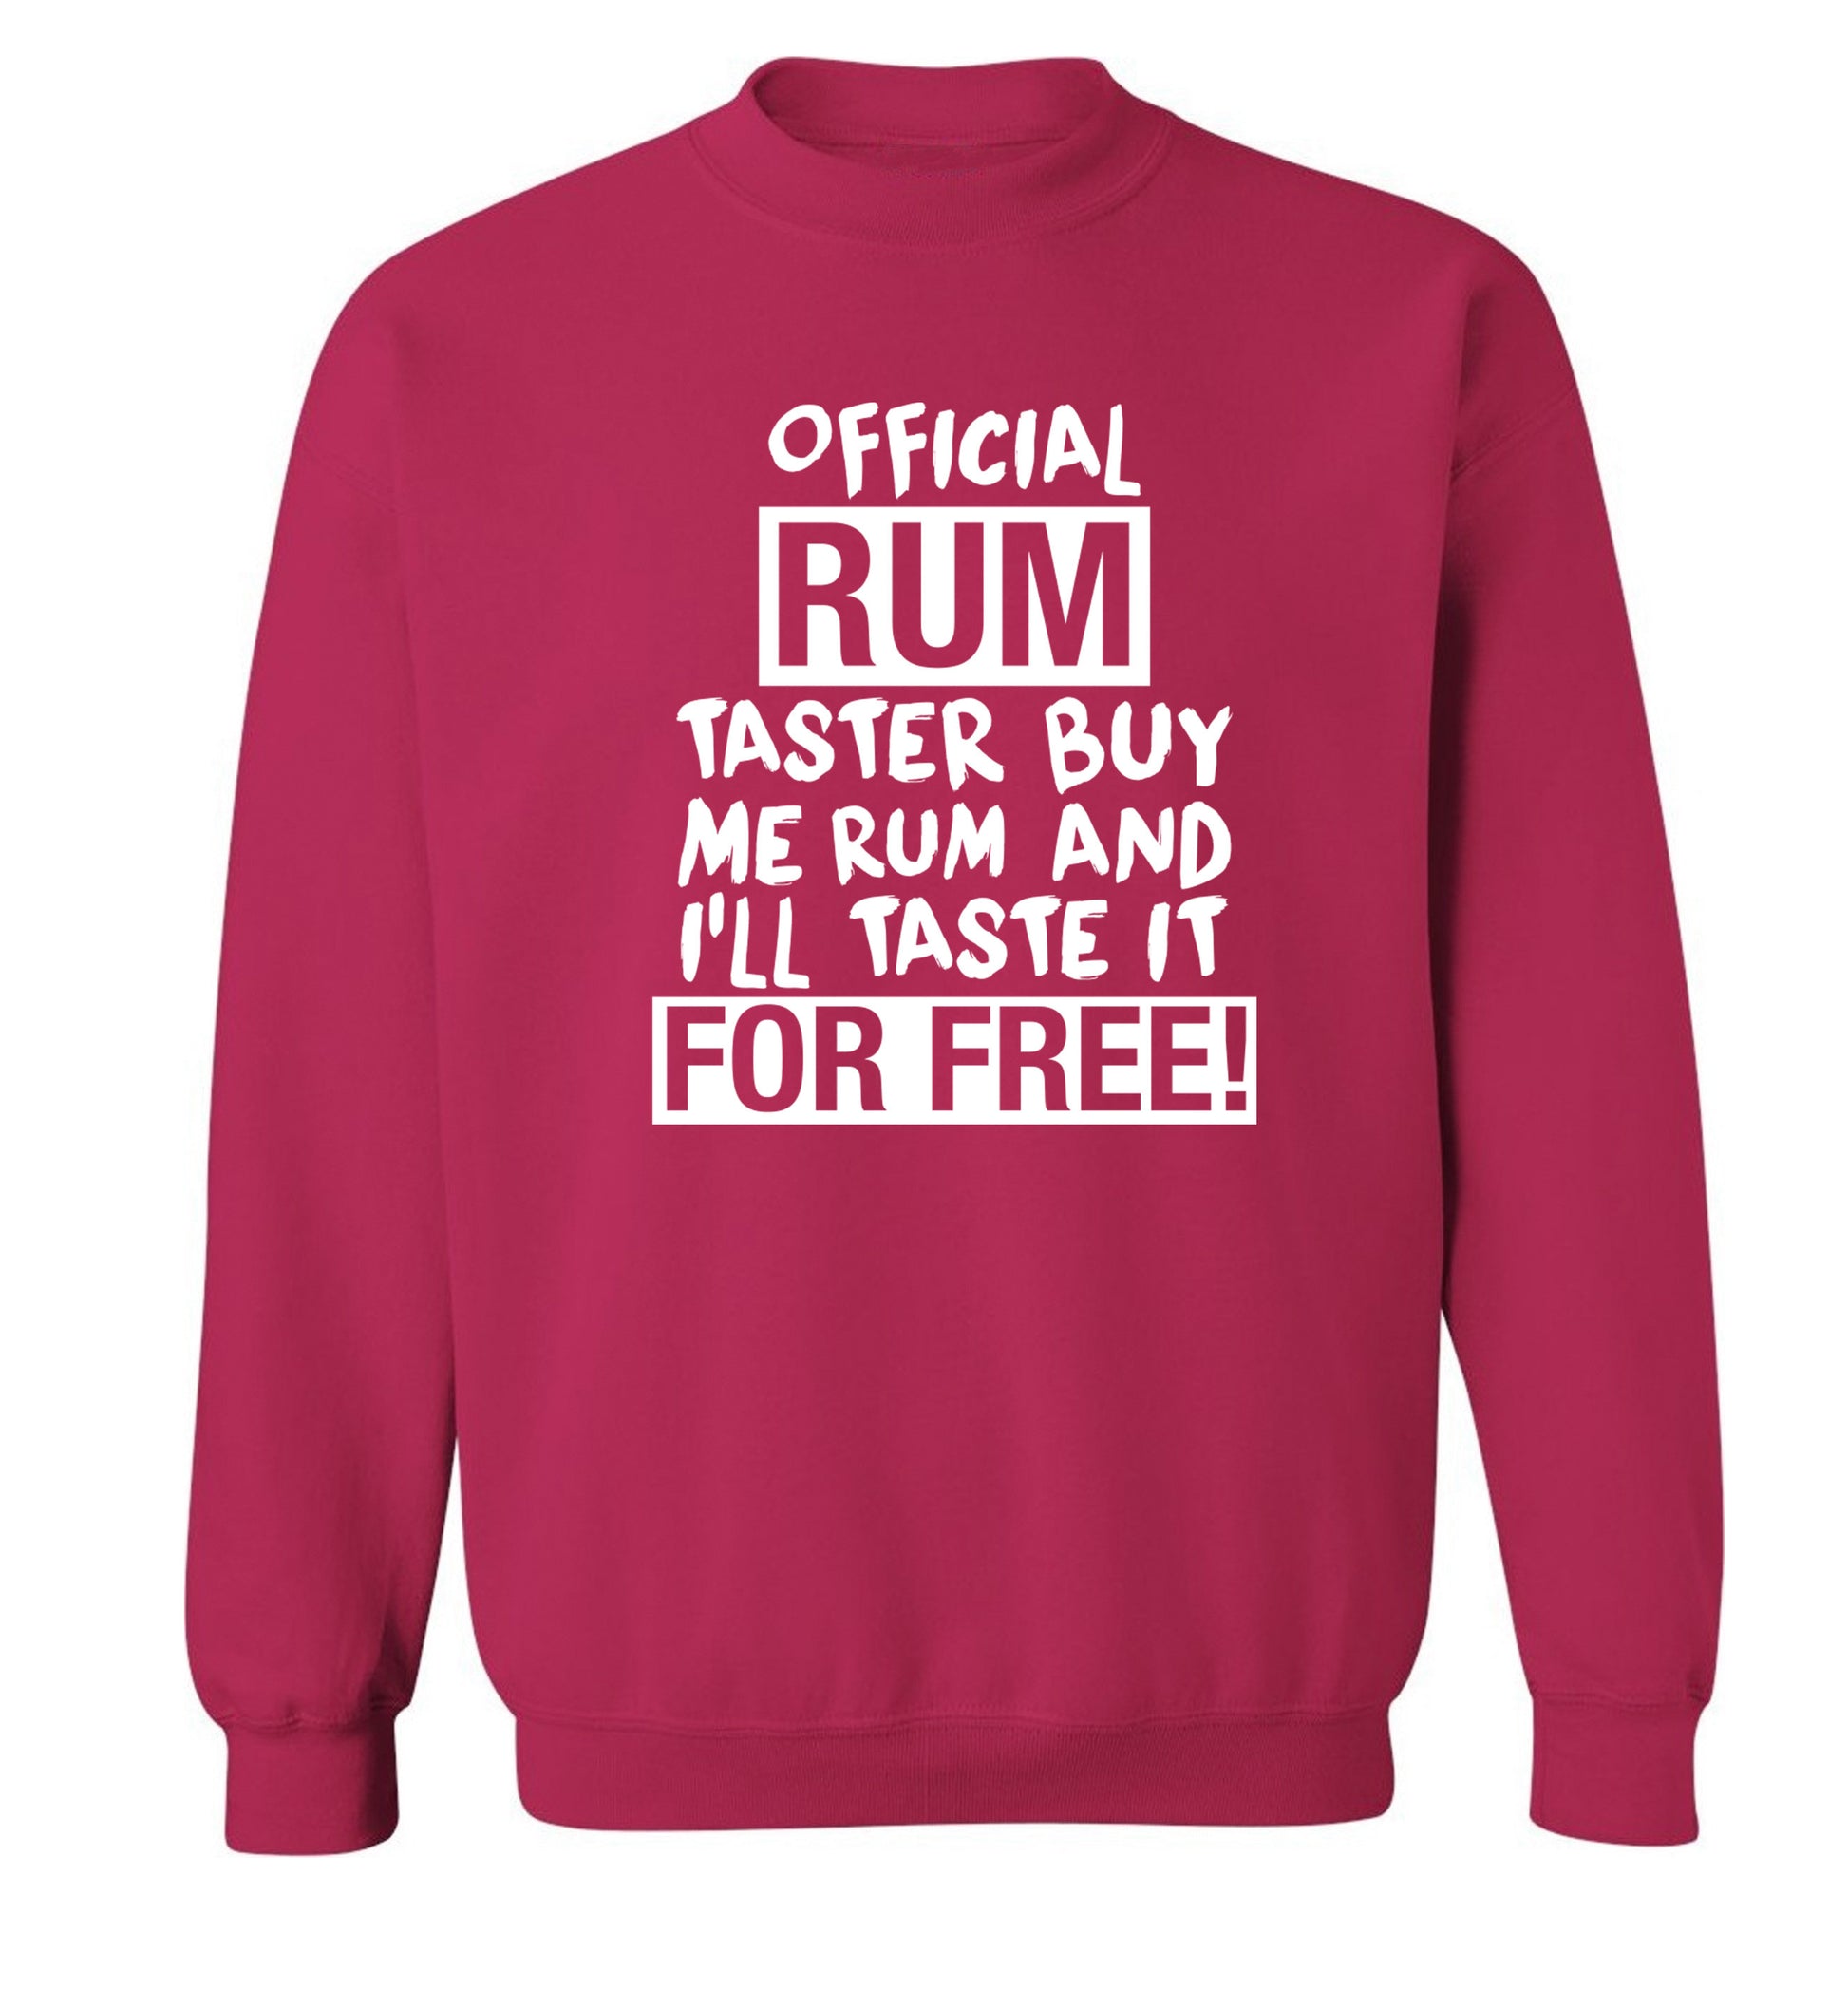 Official rum taster buy me rum and I'll taste it for free Adult's unisex pink Sweater 2XL